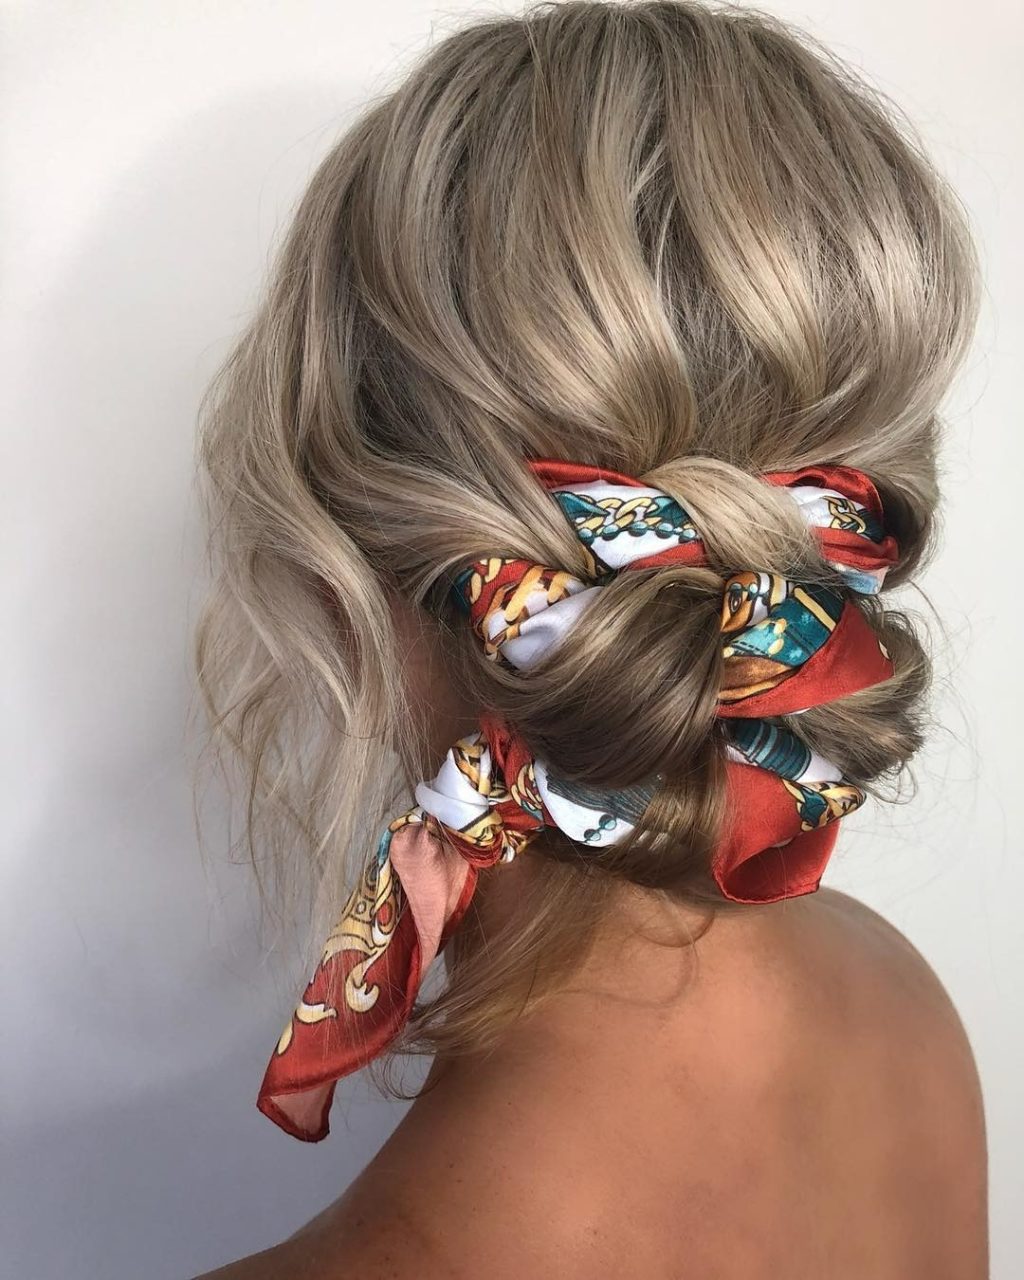 Hairstyle updo with a scarf